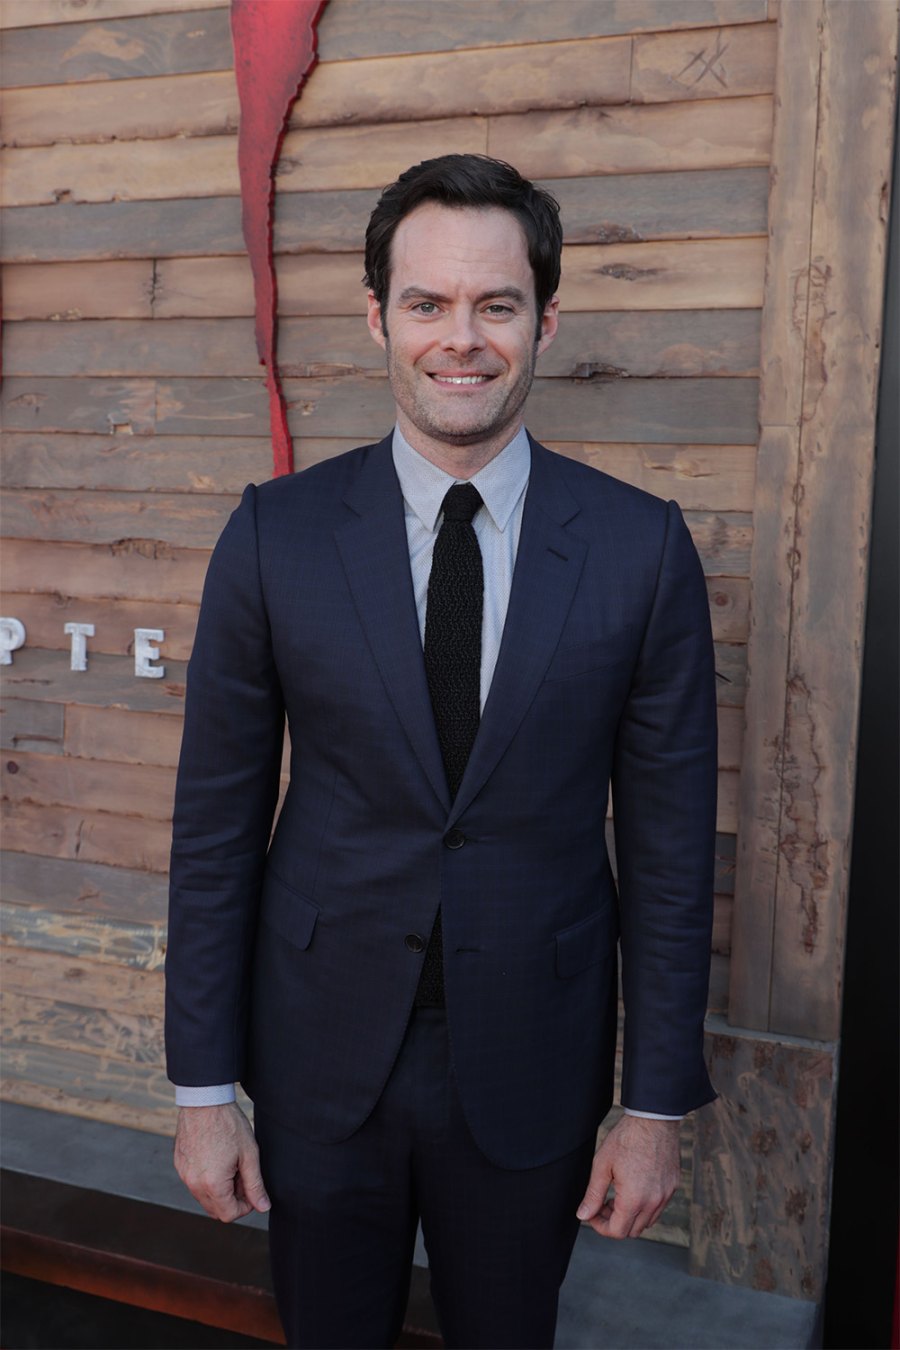 Bill Hader's Most Hilarious Fatherhood Quotes While Raising Daughters Hannah, Harper and Hayley